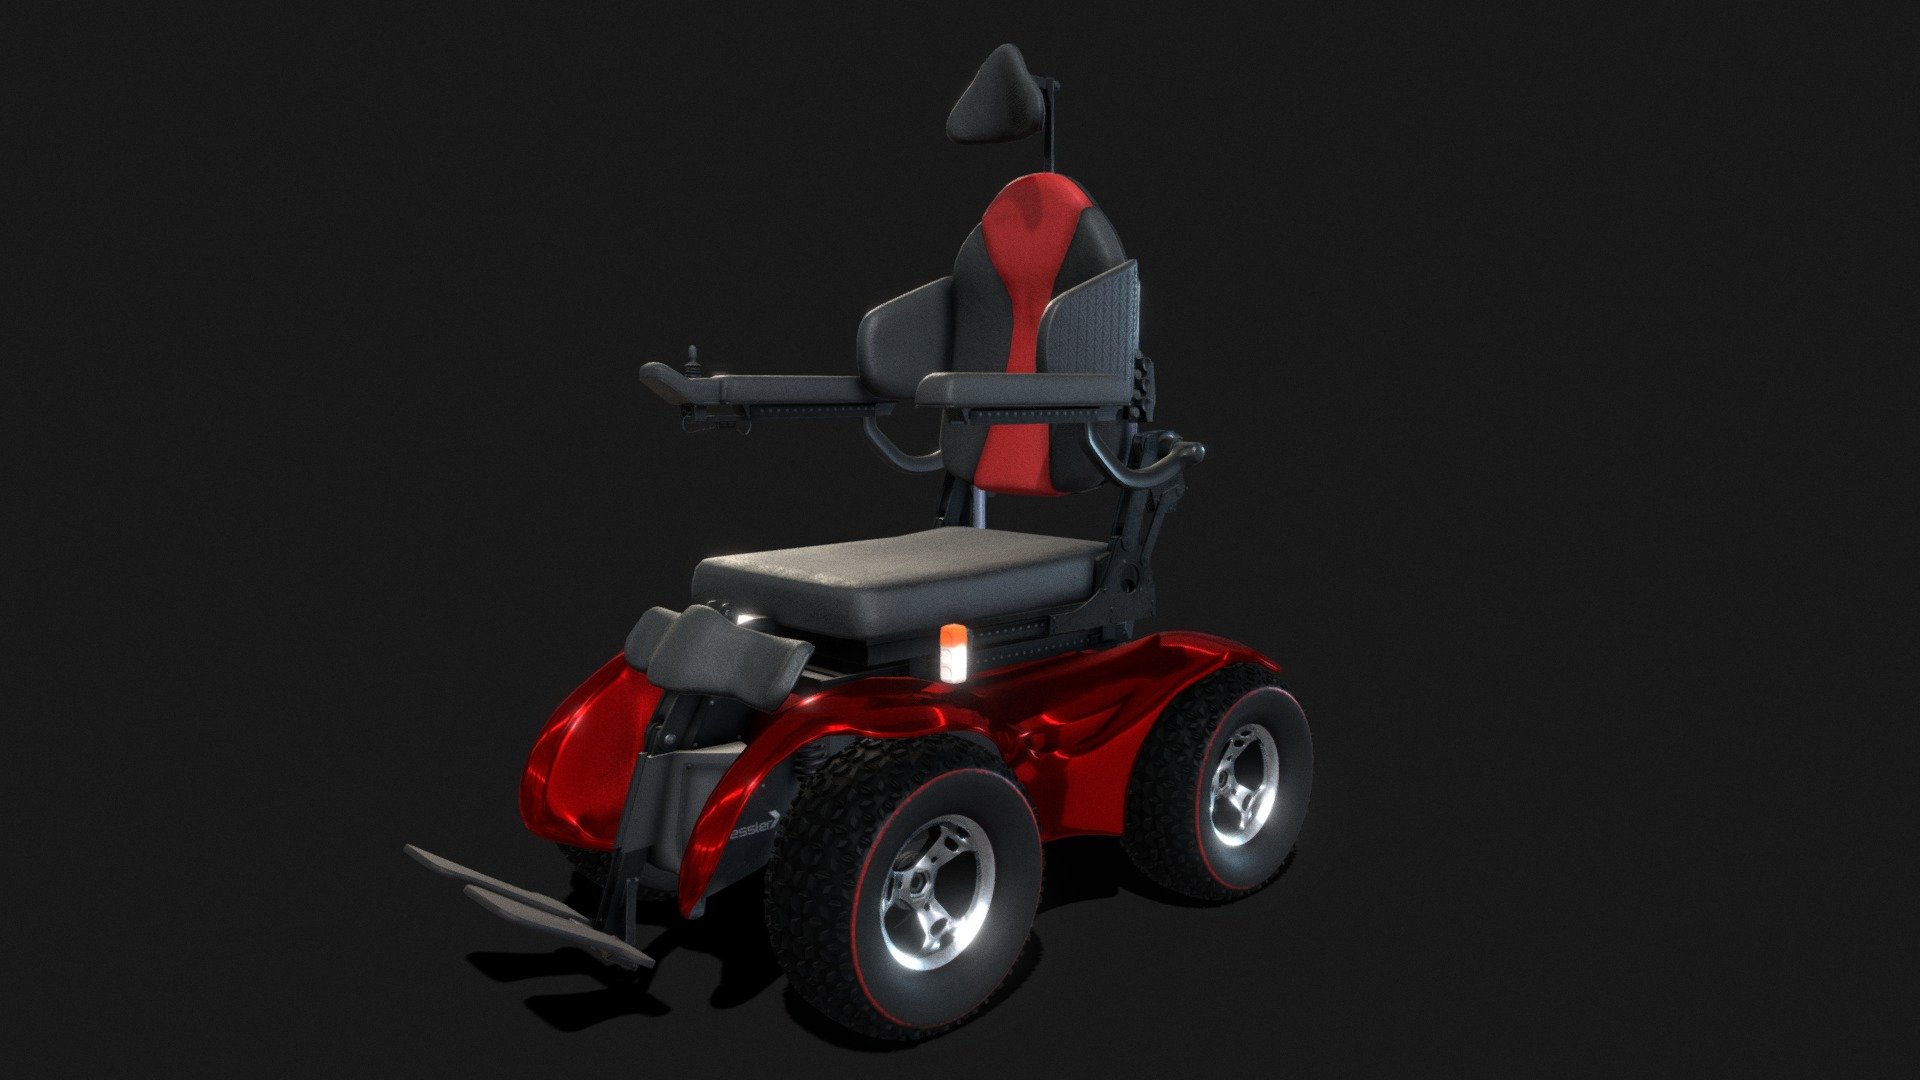 (This model is not an exact reproduction of an actual power wheelchair).

Compact design electric wheelchair with soft rehabilitation seat. The design allows it to adapt to all terrains and the rigging system allows it to adapt to uneven terrain, reproduce the example animation. The joystick is also fully rigged for greater fidelity in the animation.

You can download this model completely free for your projects 3d model